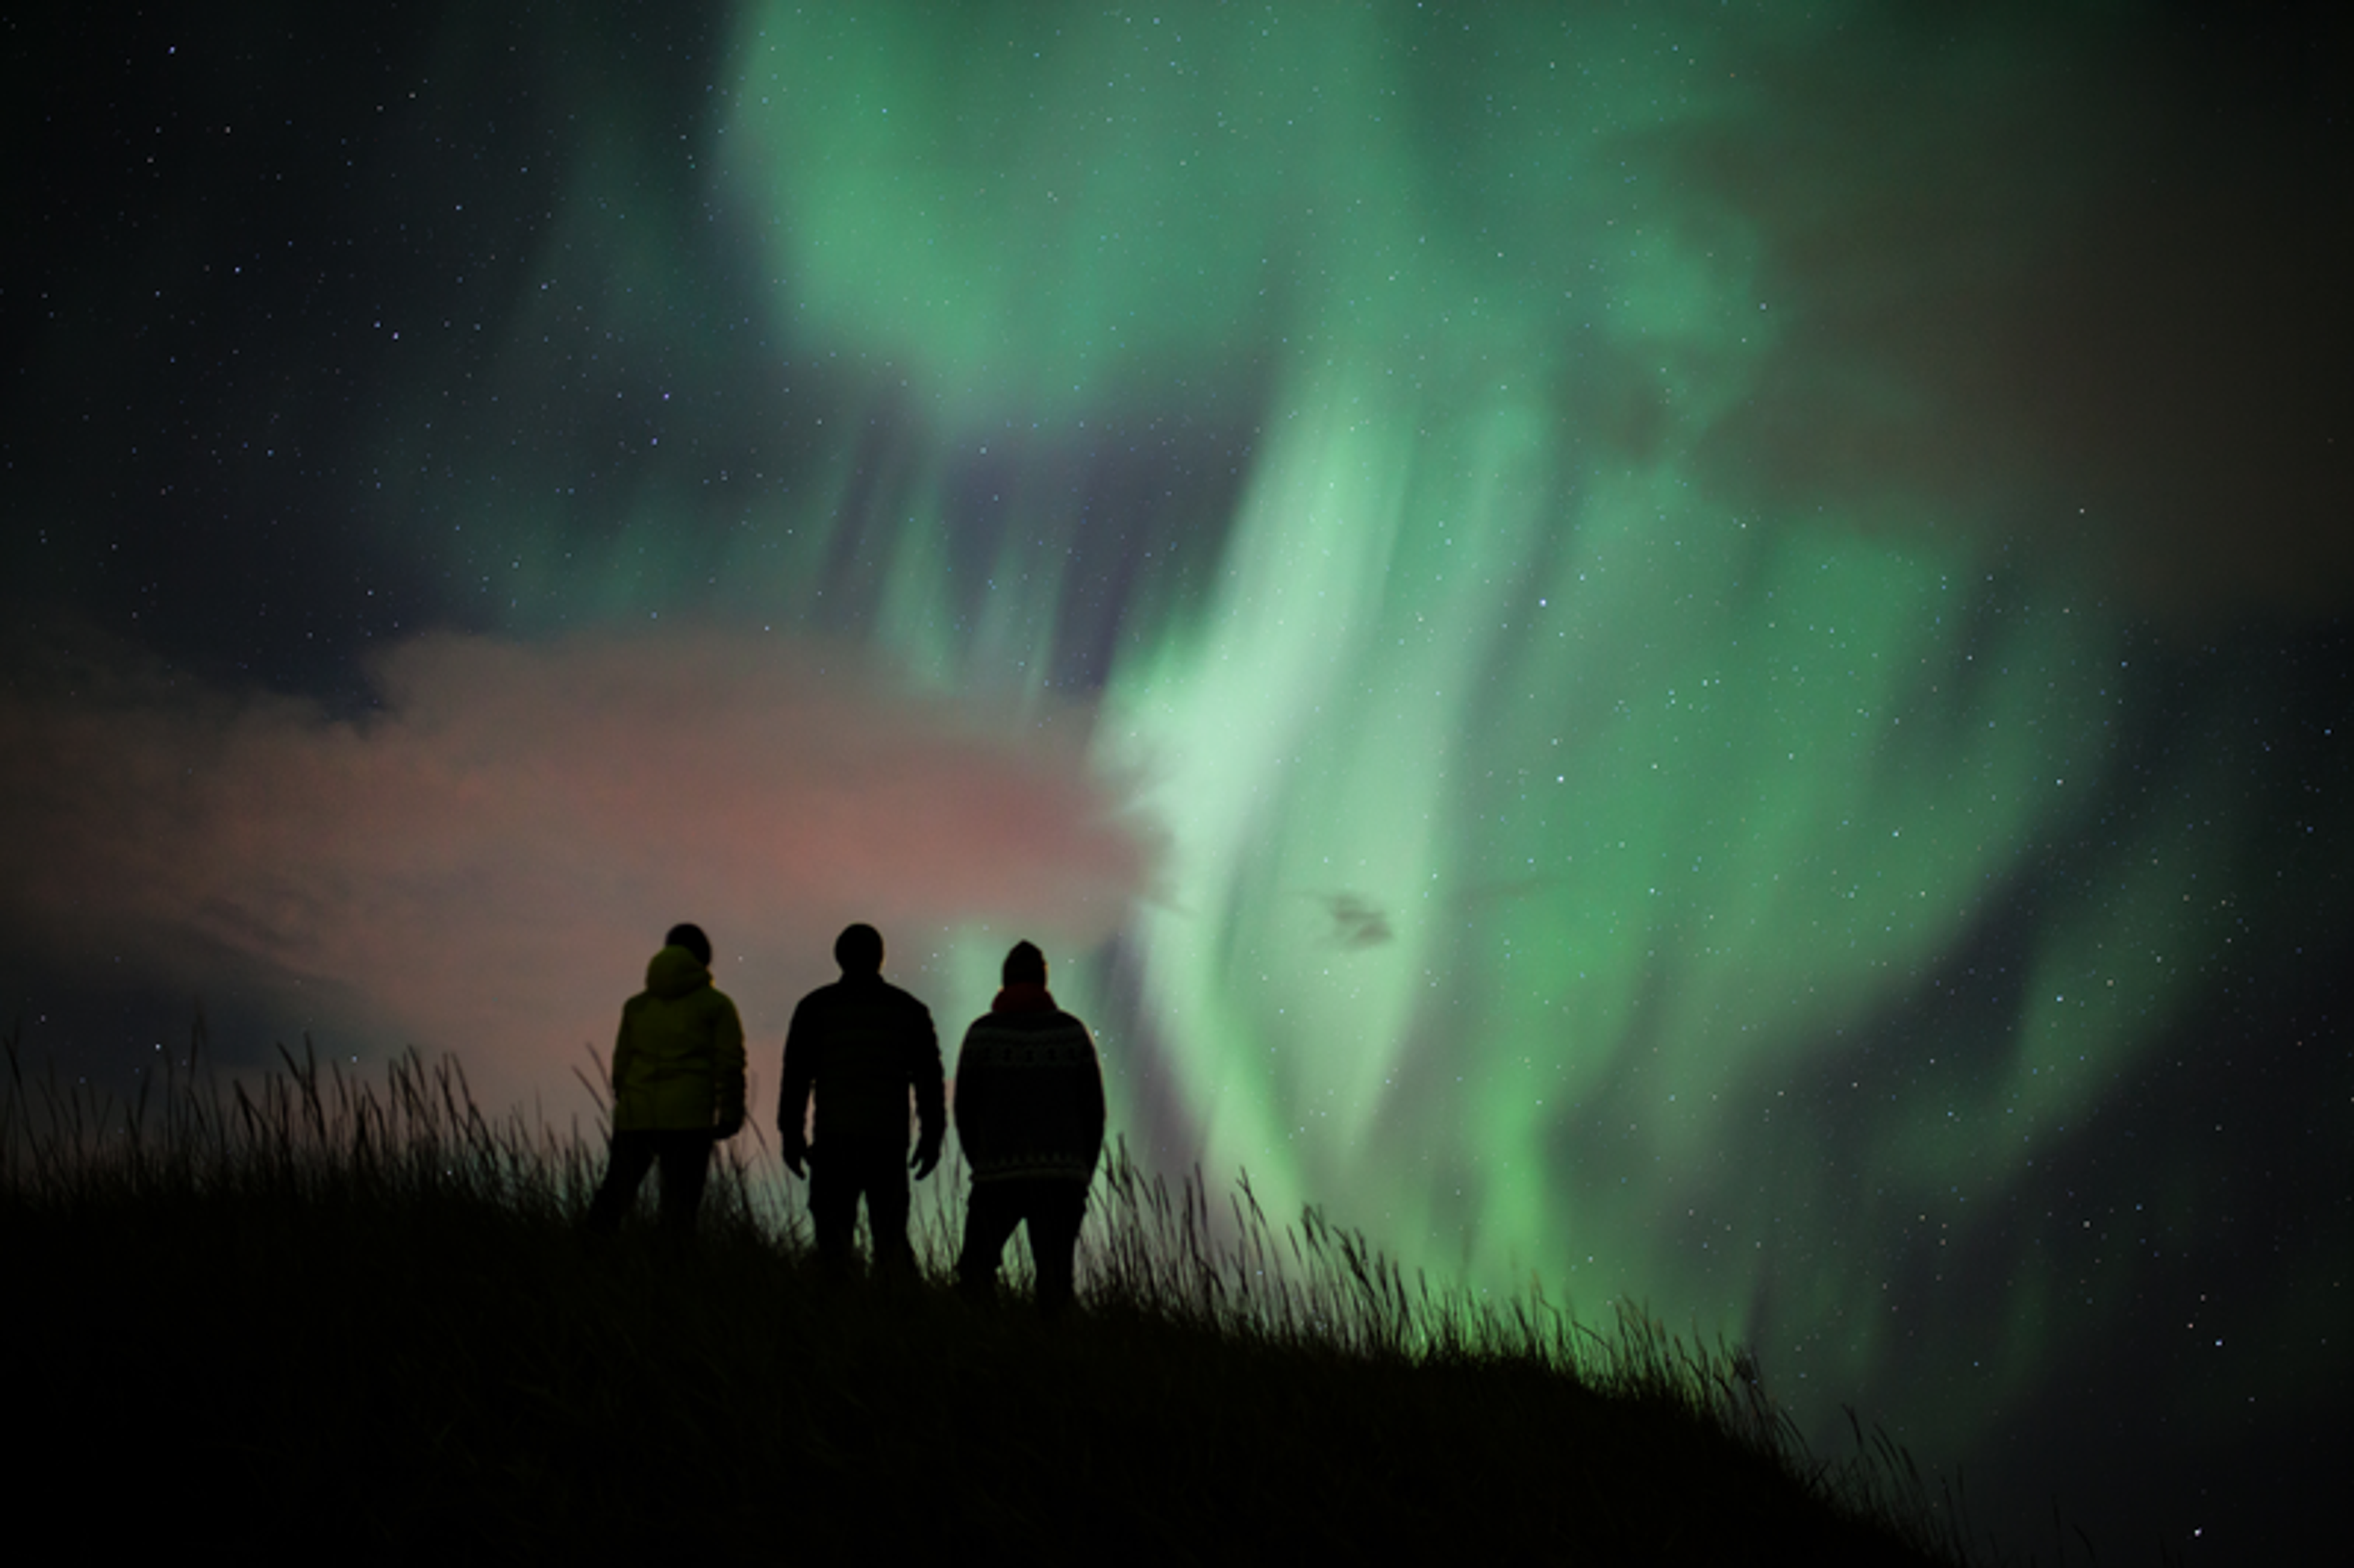 A group of people standing in silhouette against a backdrop of the Northern Lights in a night sky.